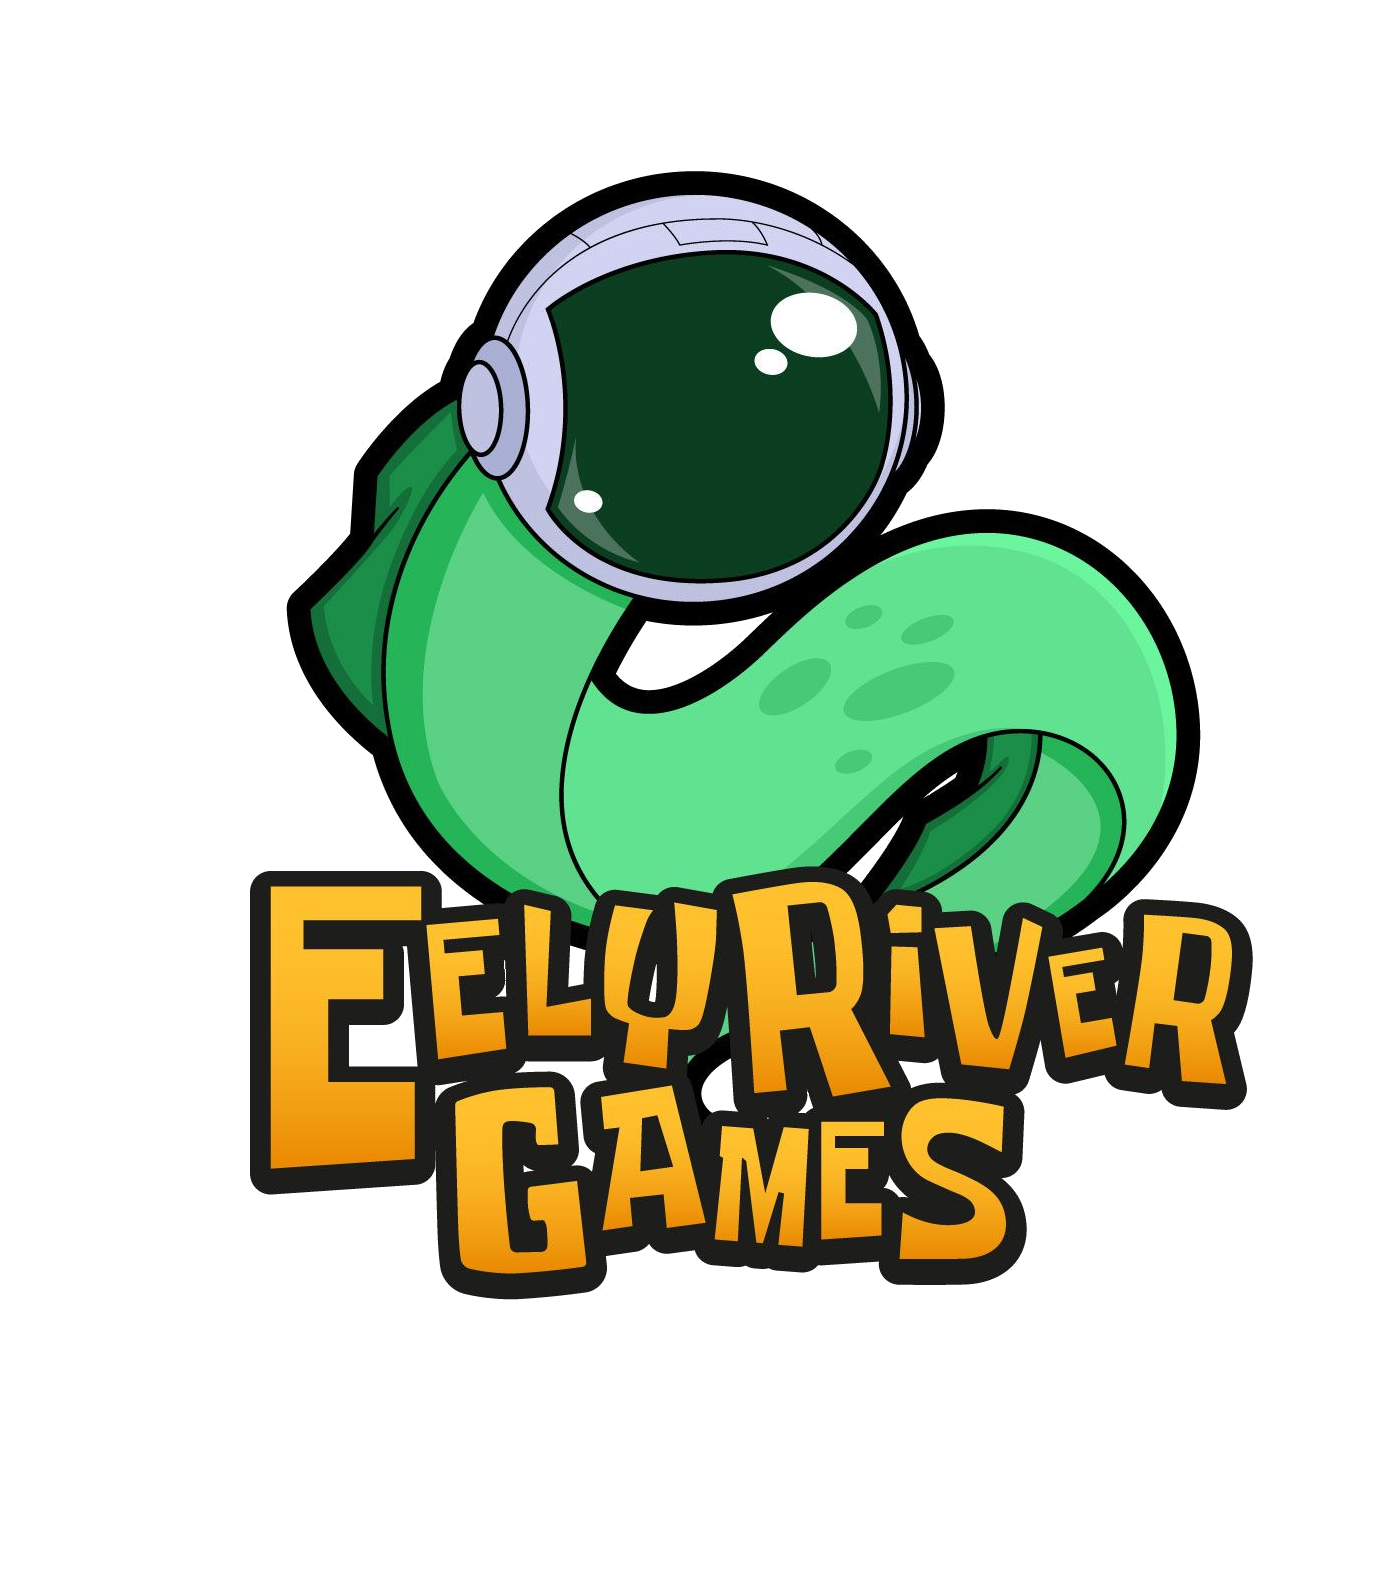 Eely River Games